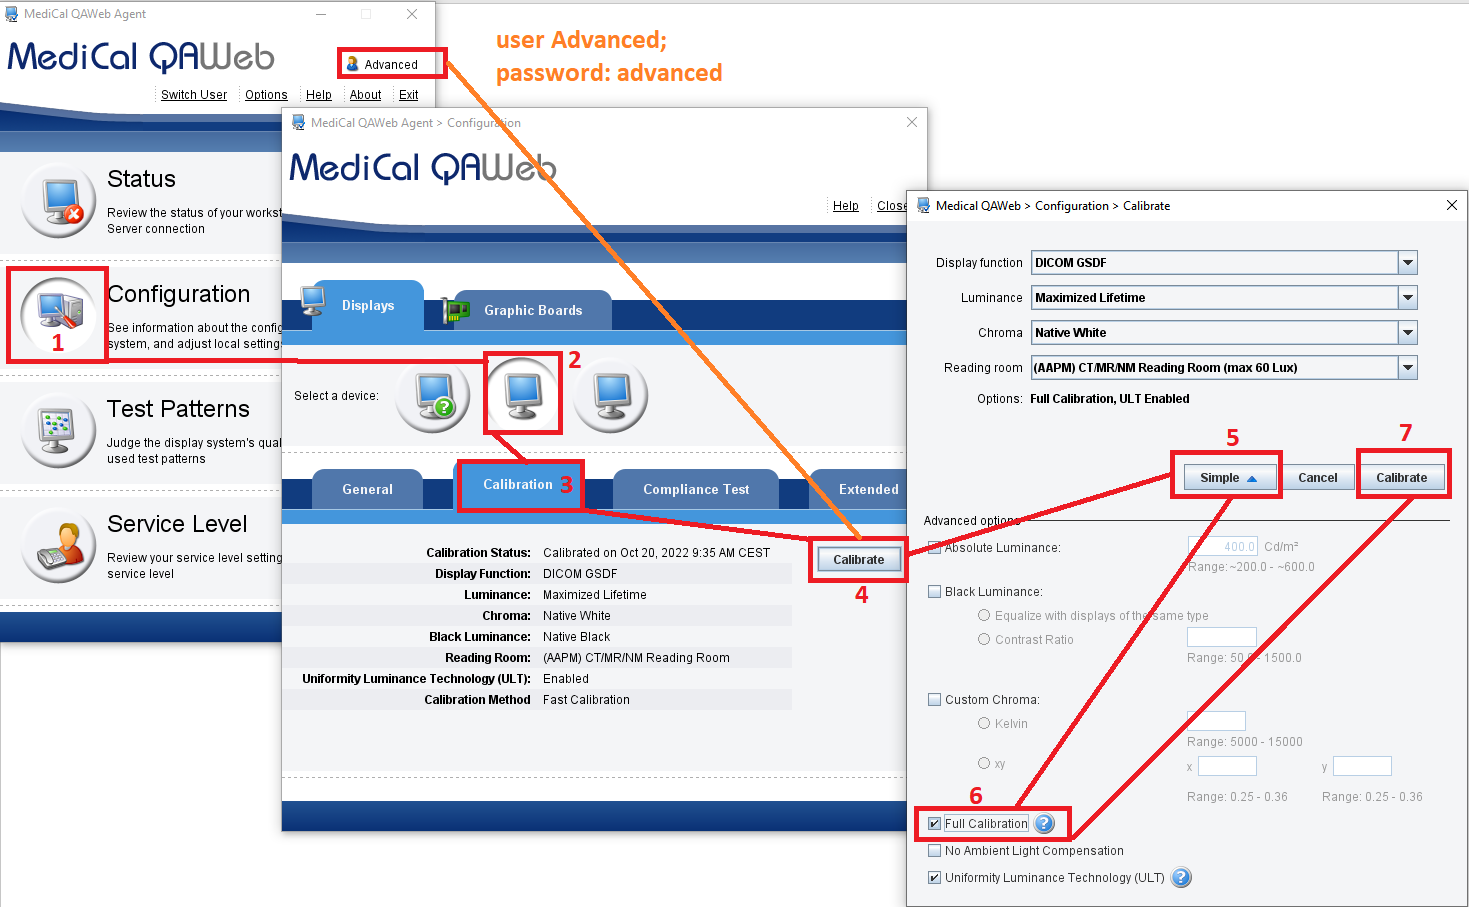 how_to_do_afull_calibration_in_Medical_QAWeb_Agent.png